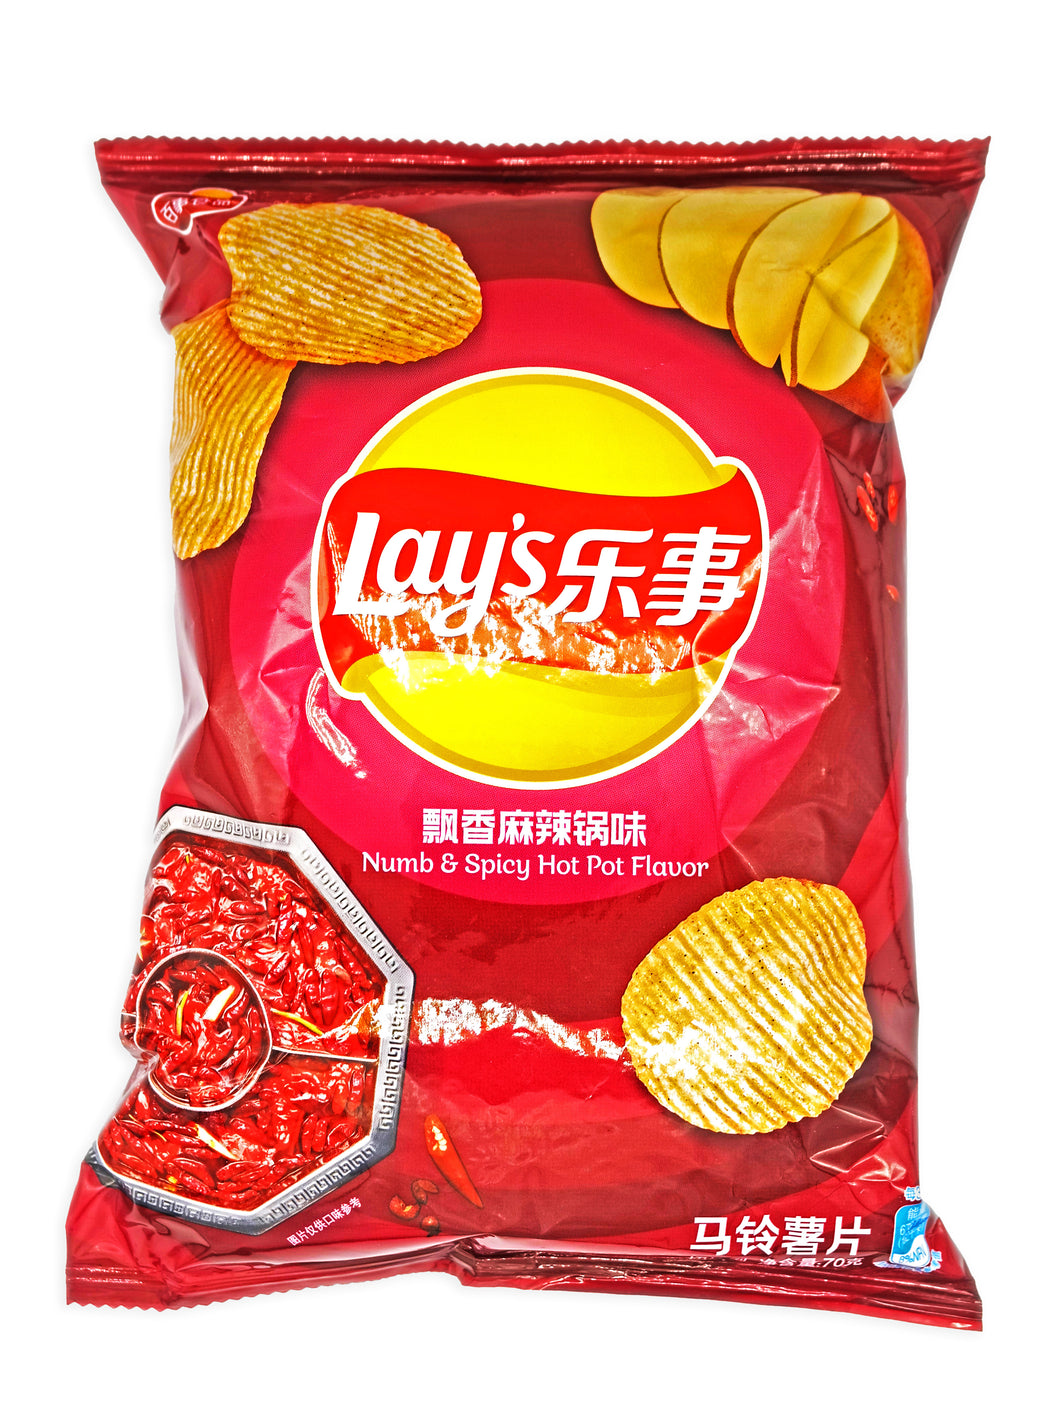 Lay's Numb & Spicy Hot Pot Flavor Chips